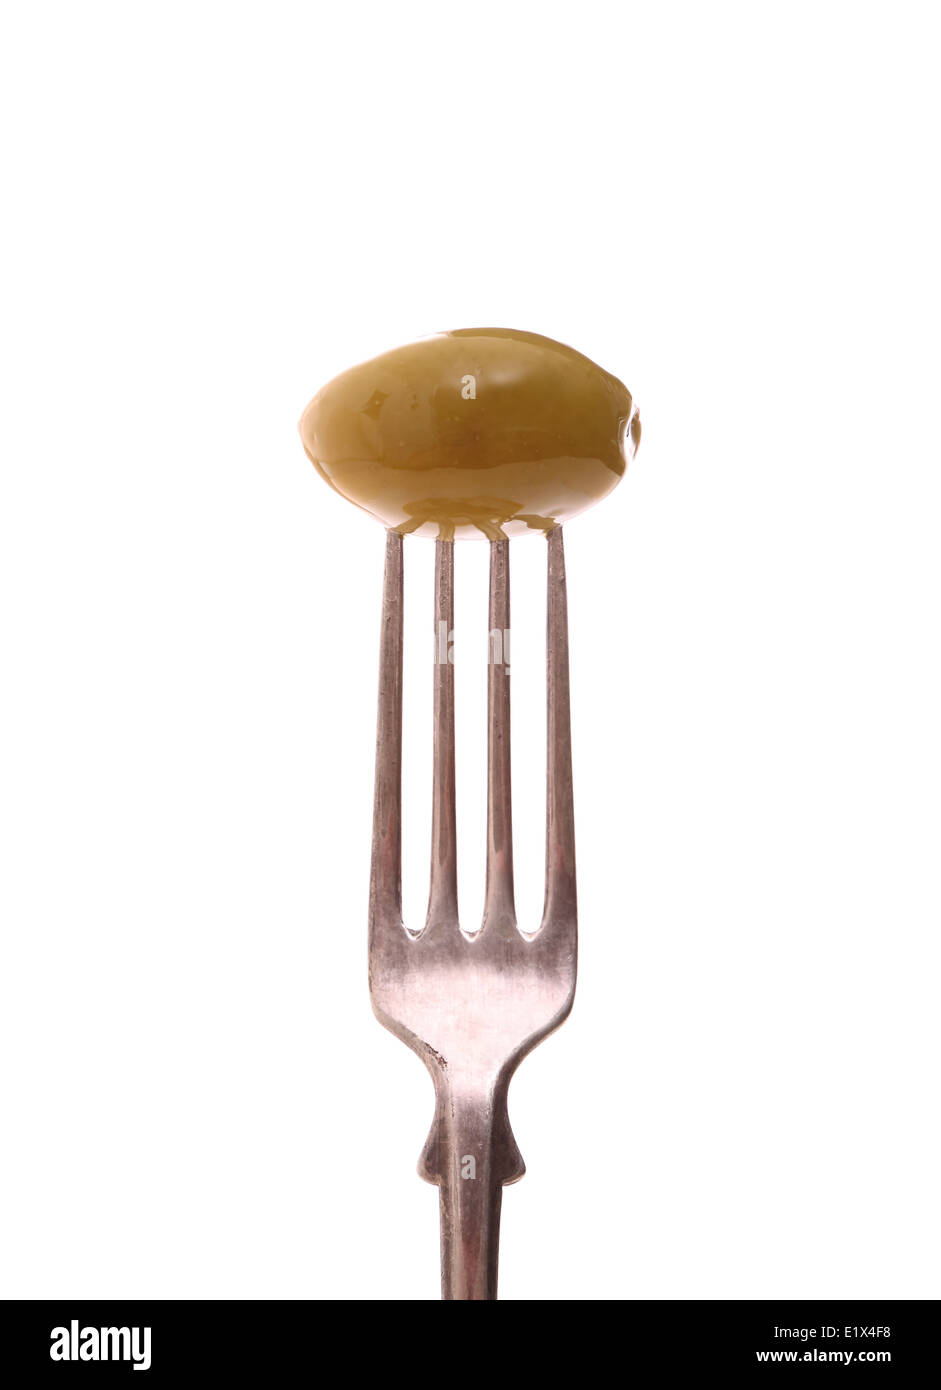 Huge green olive on fork, isolated, close up Stock Photo